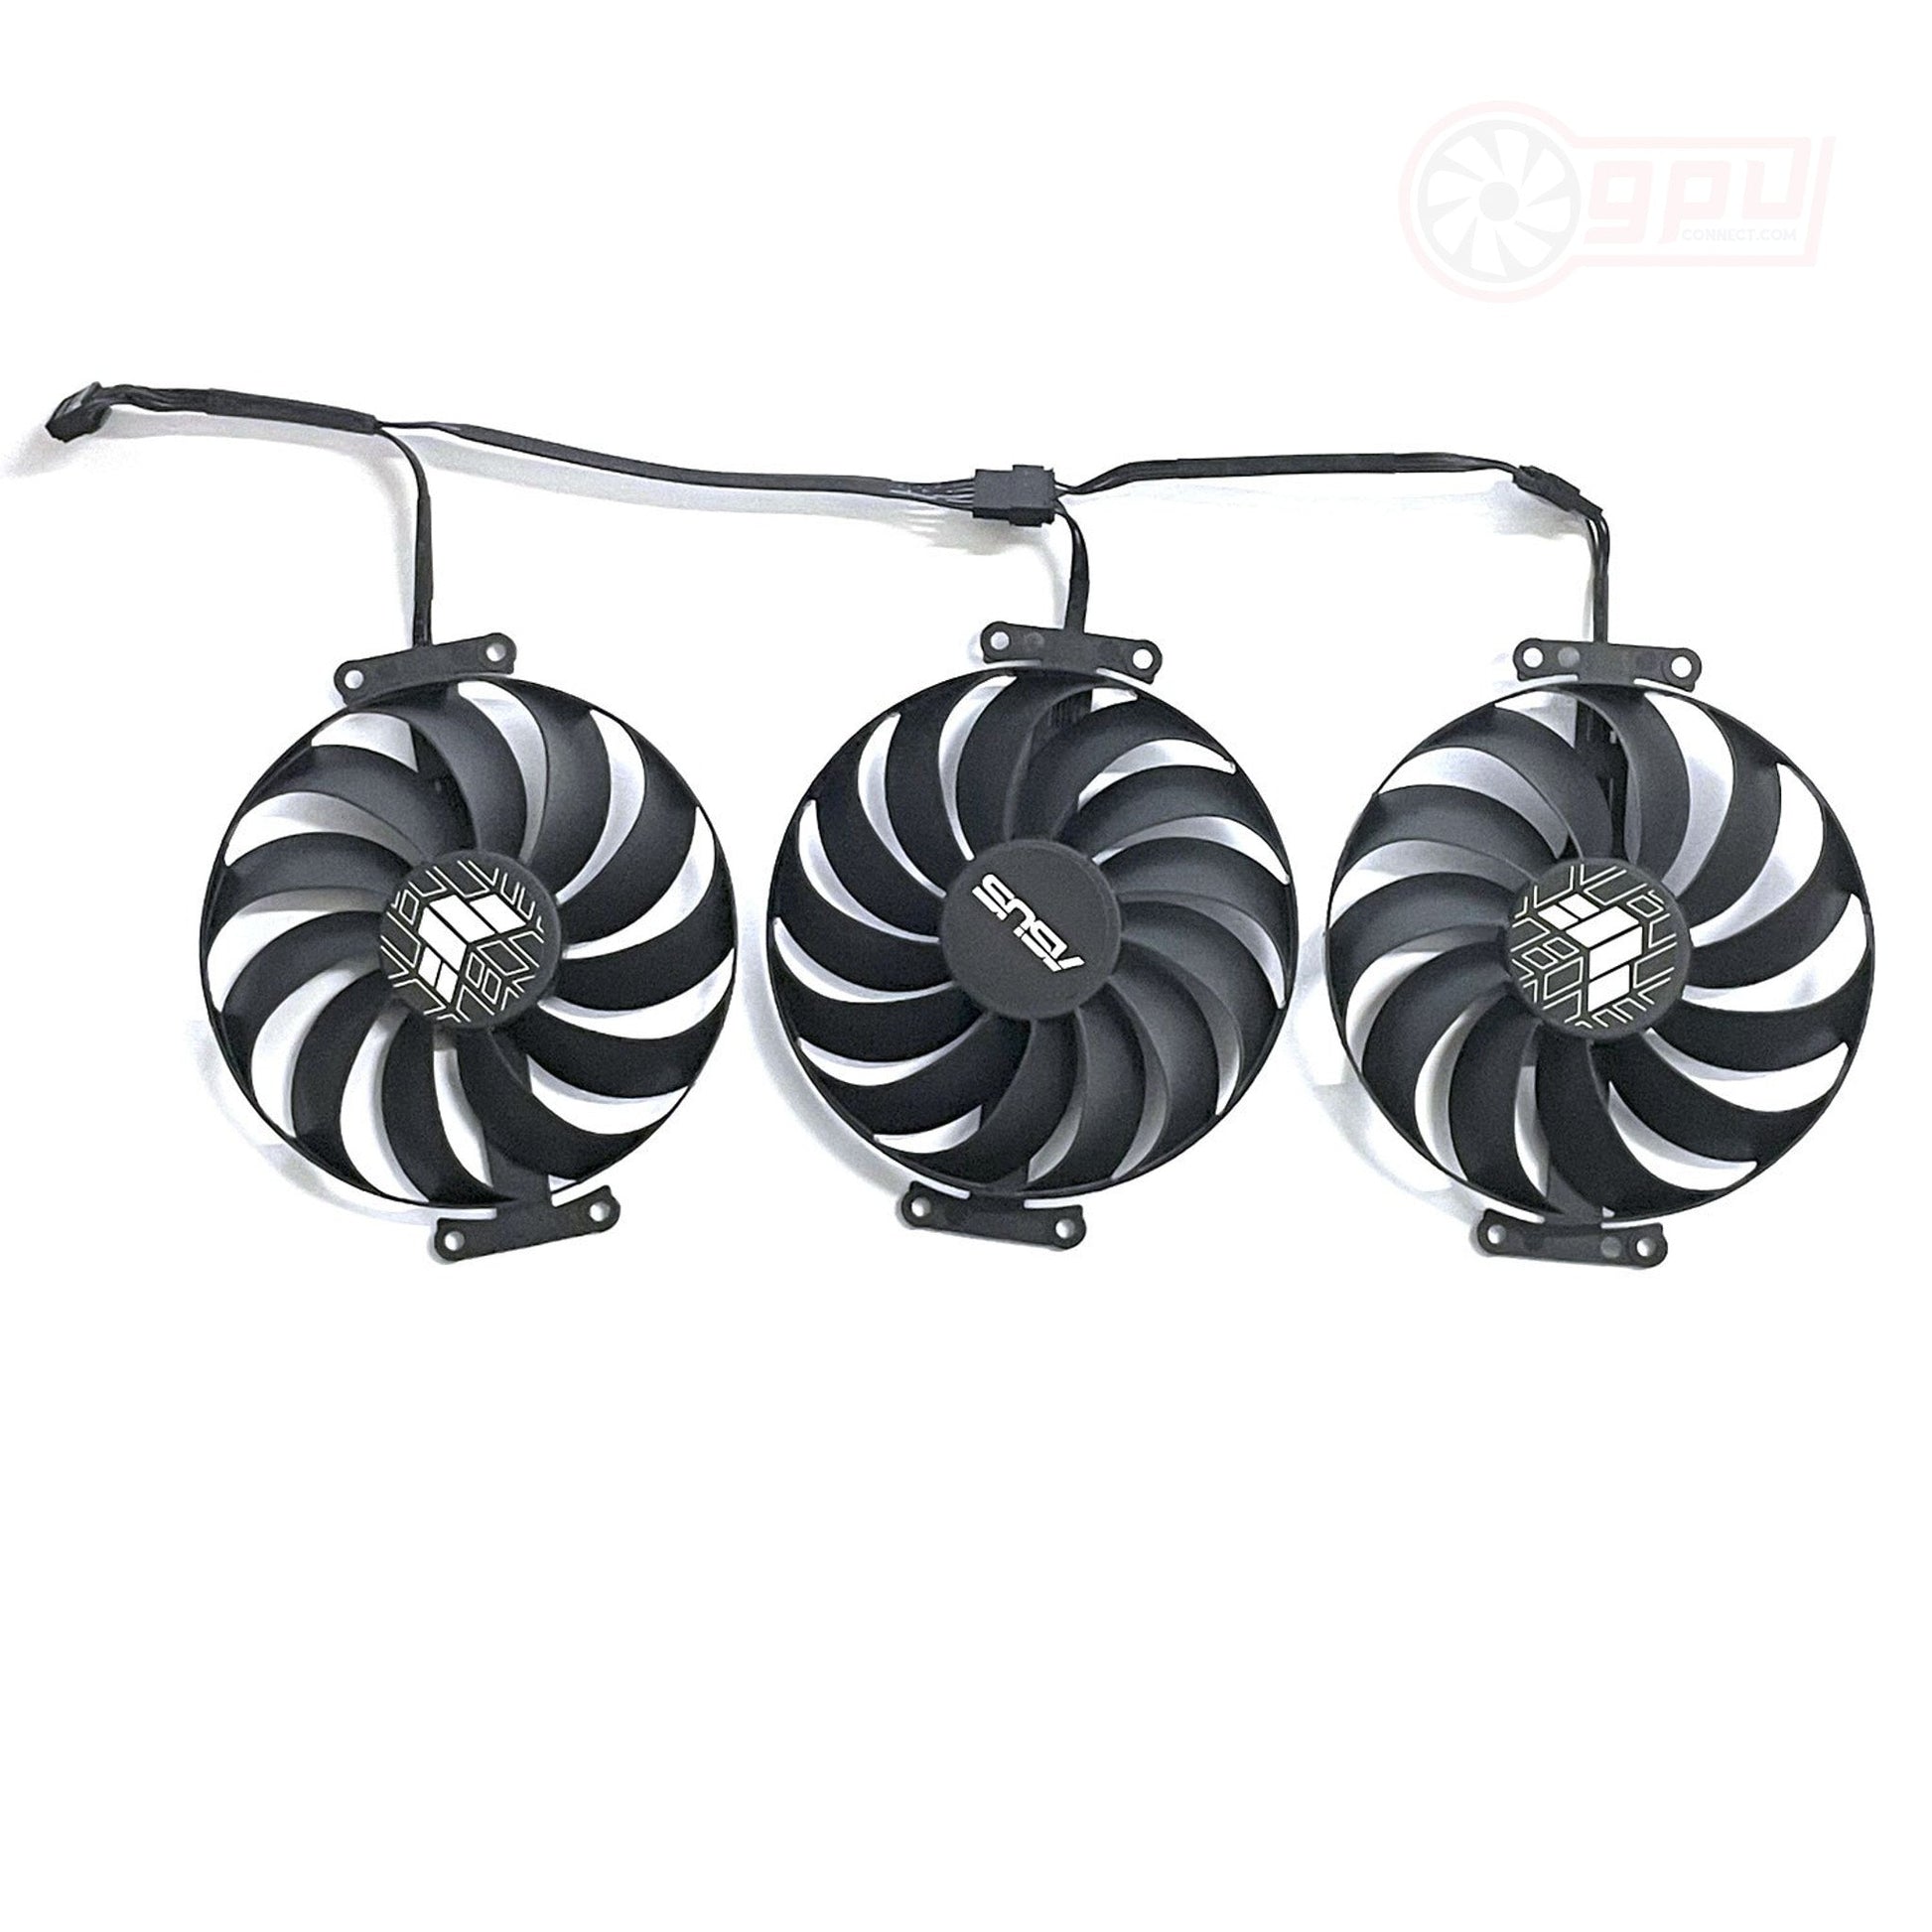 ASUS TUF GAMING Radeon RX 6700 6800 6900 XT Replacement Fan Set - GPUCONNECT.COM